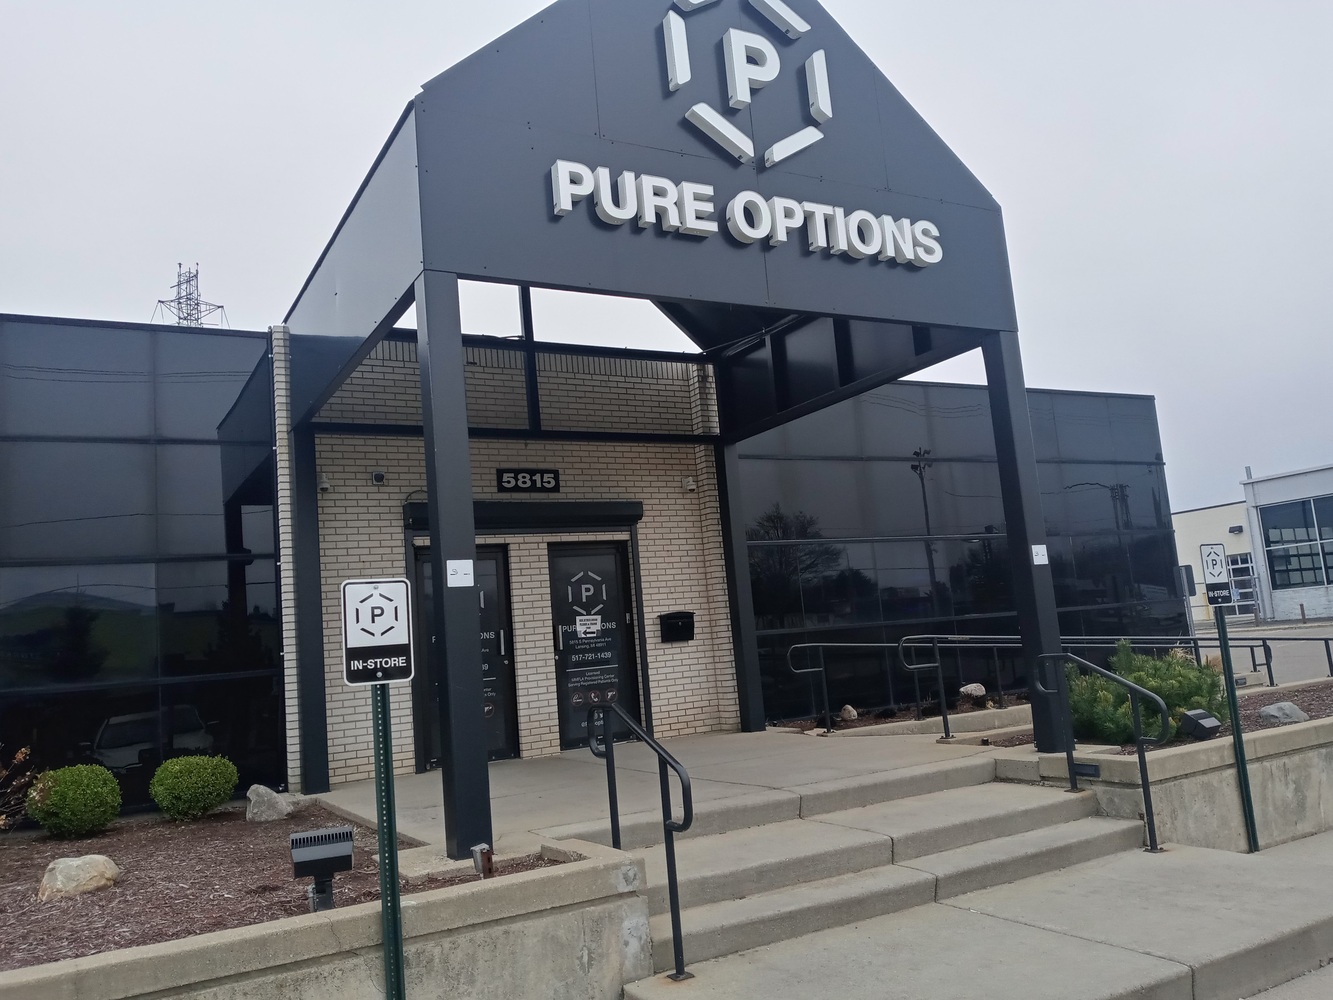 The front entrance of the Pure Options Weed Dispensary in Lansing South